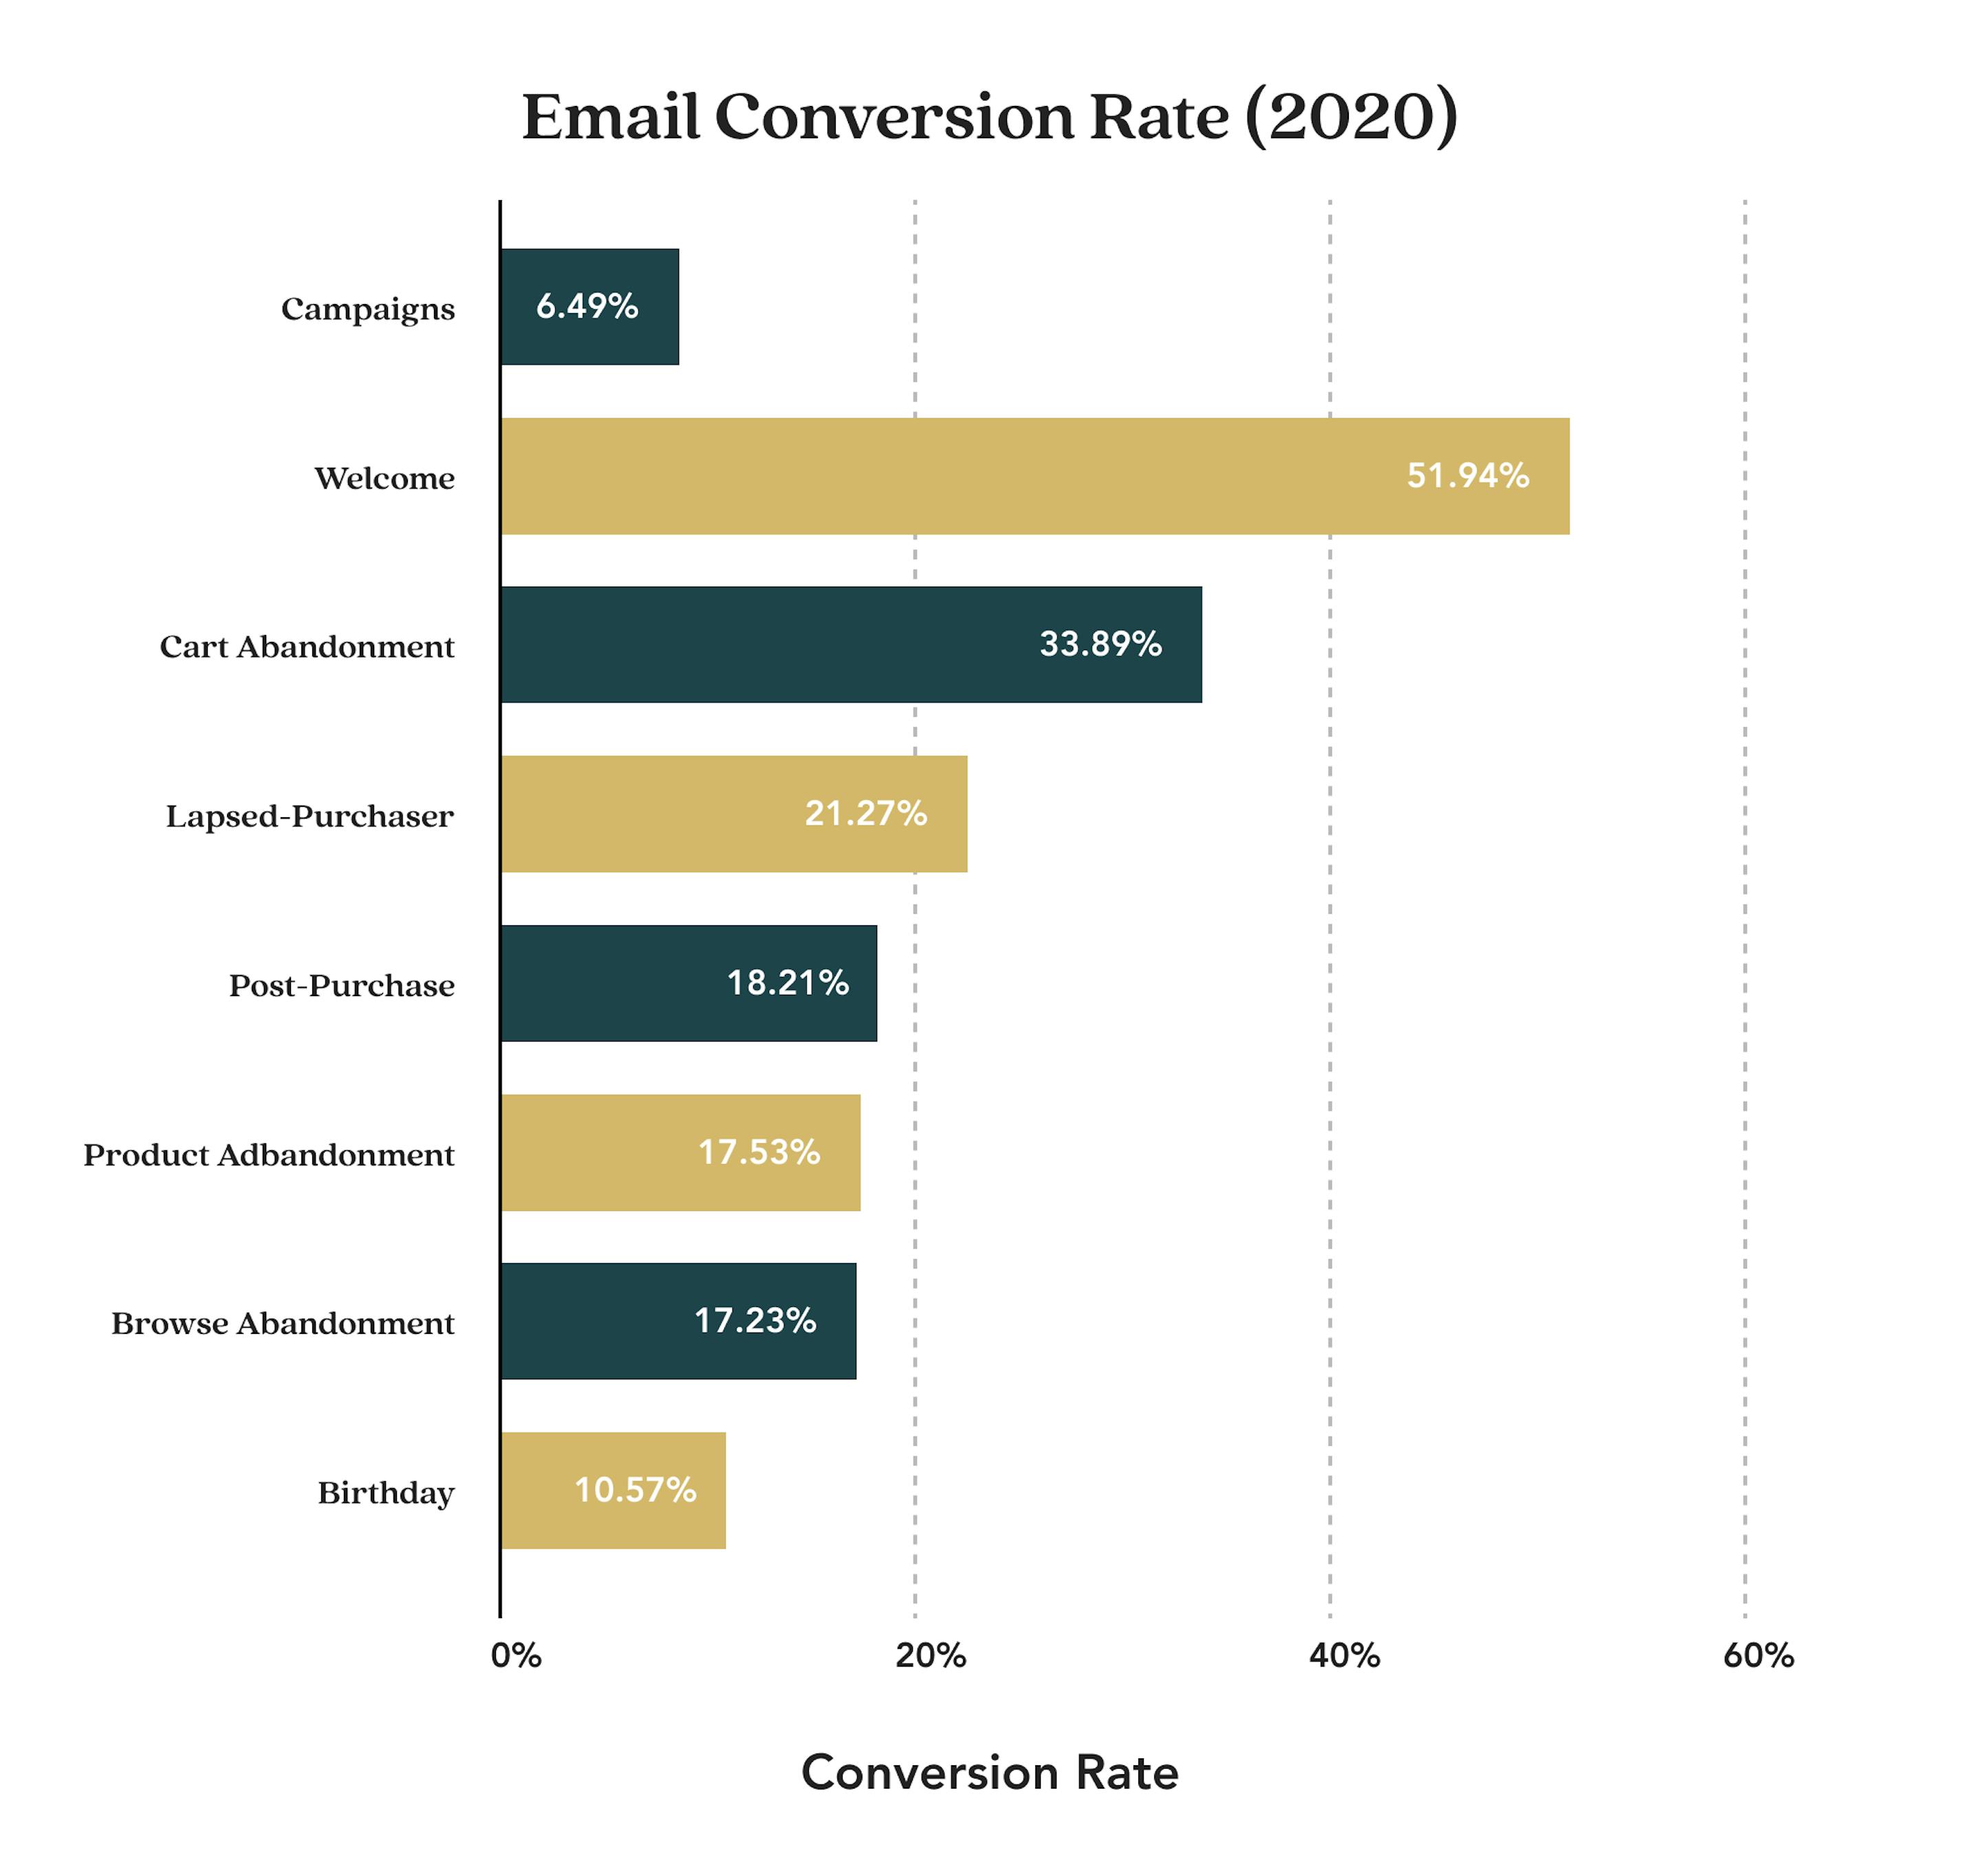 email conversions in 2020